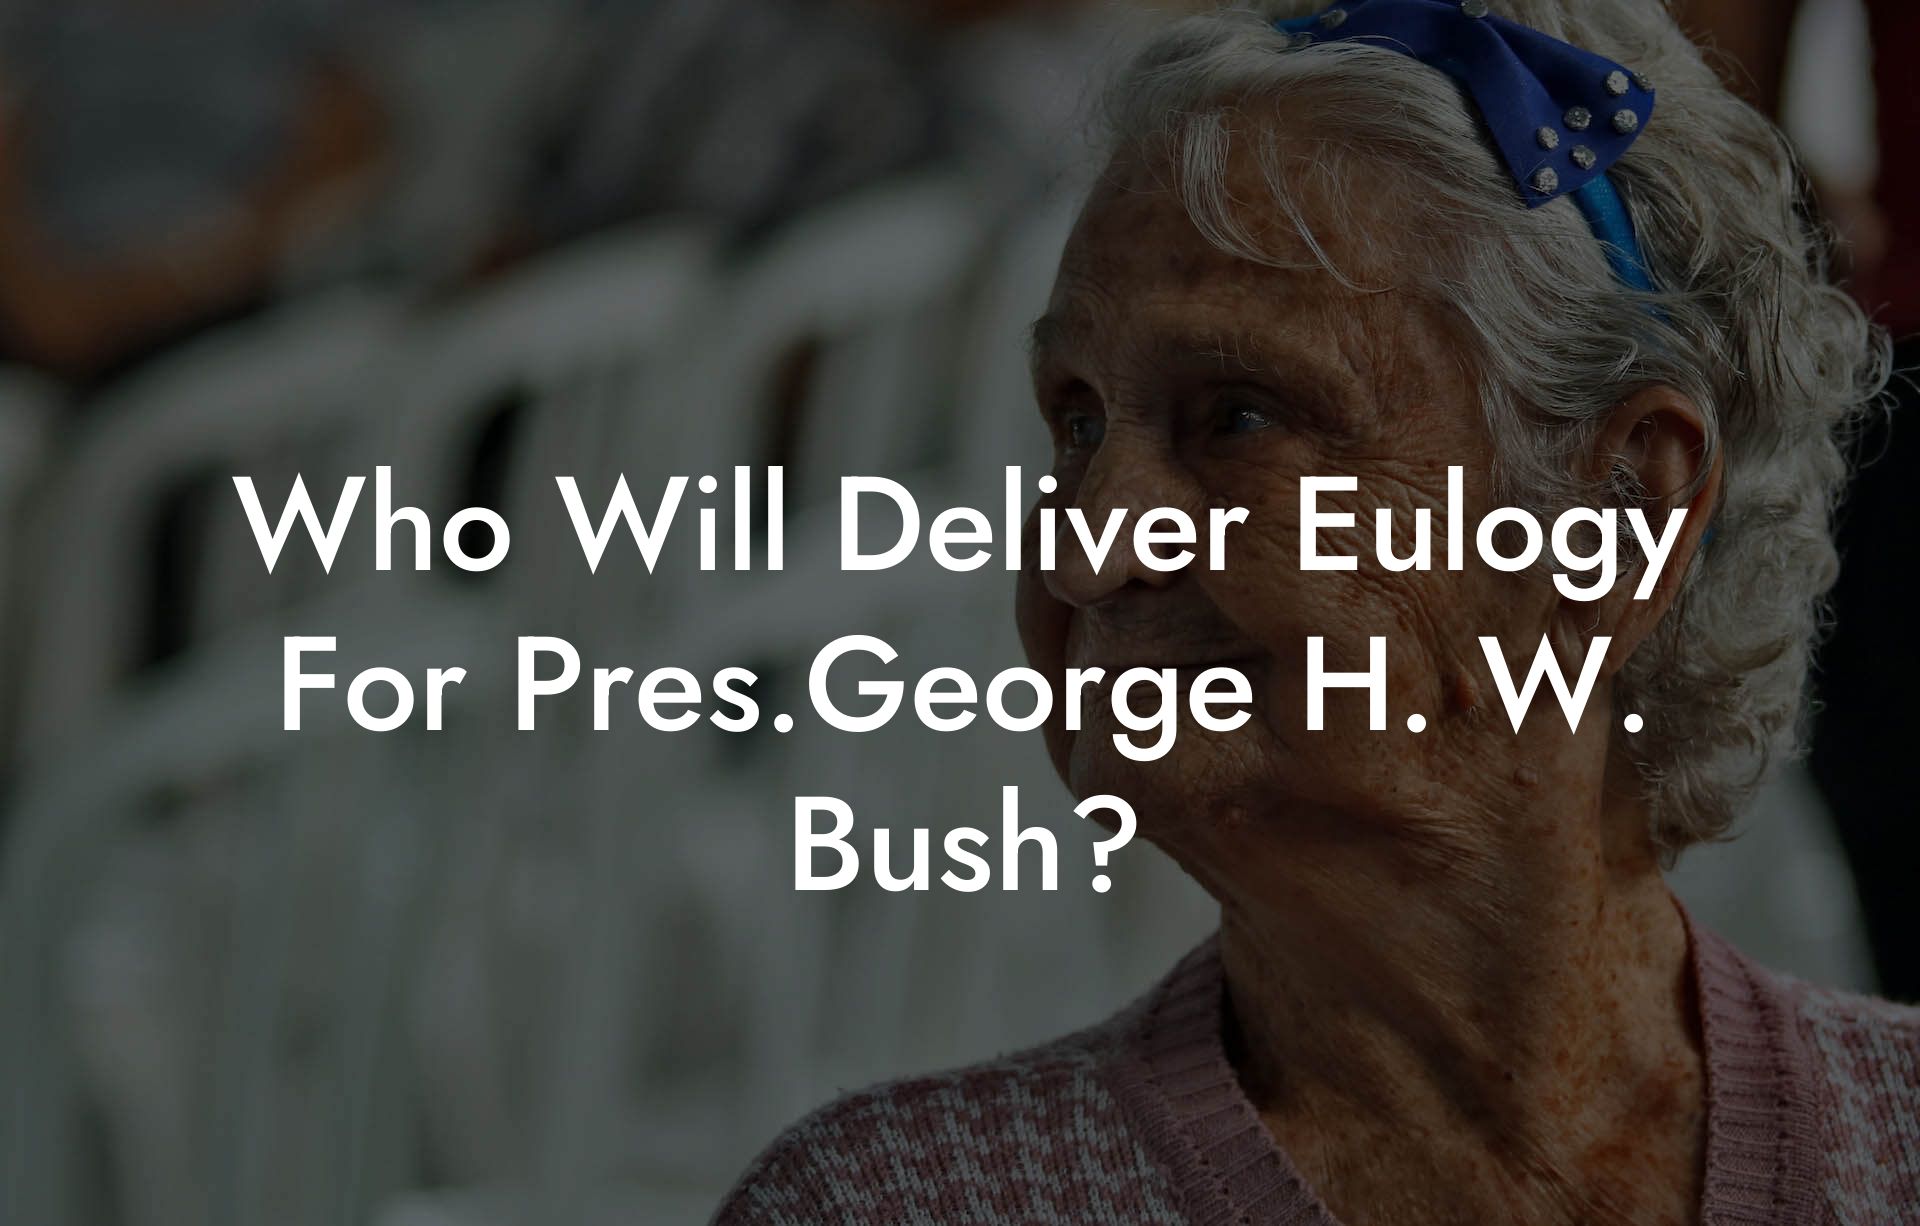 Who Will Deliver Eulogy For Pres.George H. W. Bush?